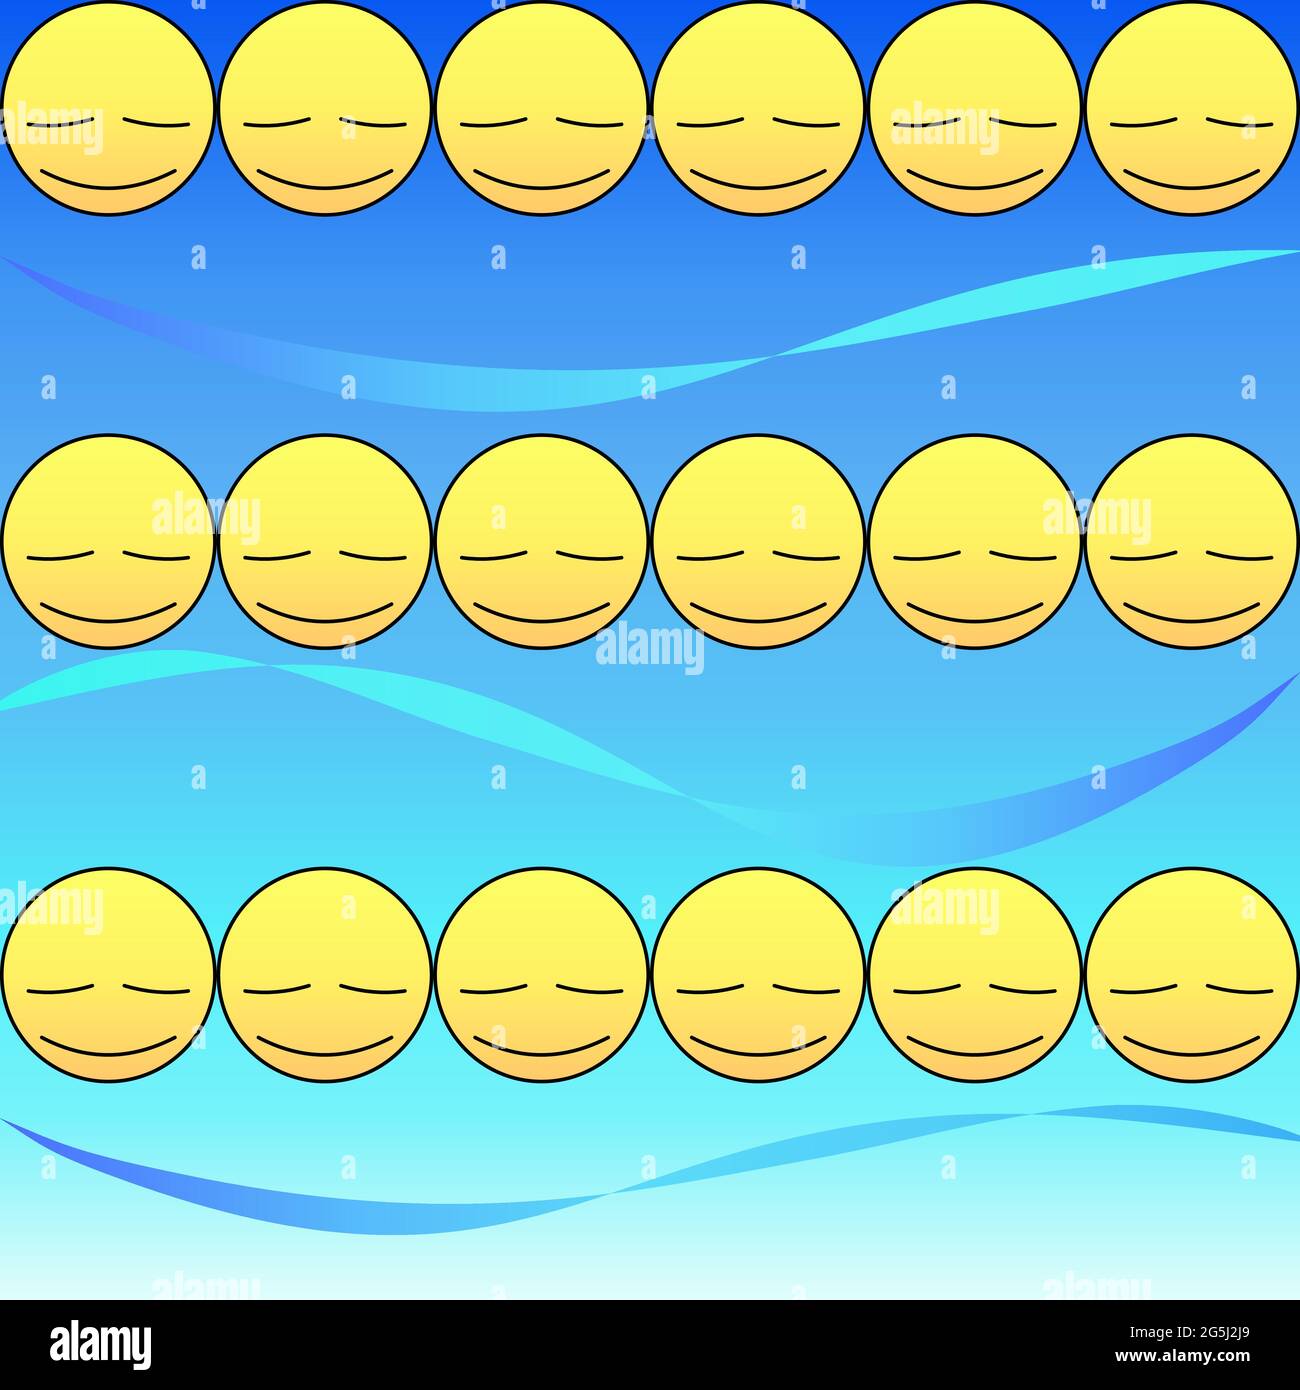 Relax emotional face in yellow with wind 10 Stock Vector